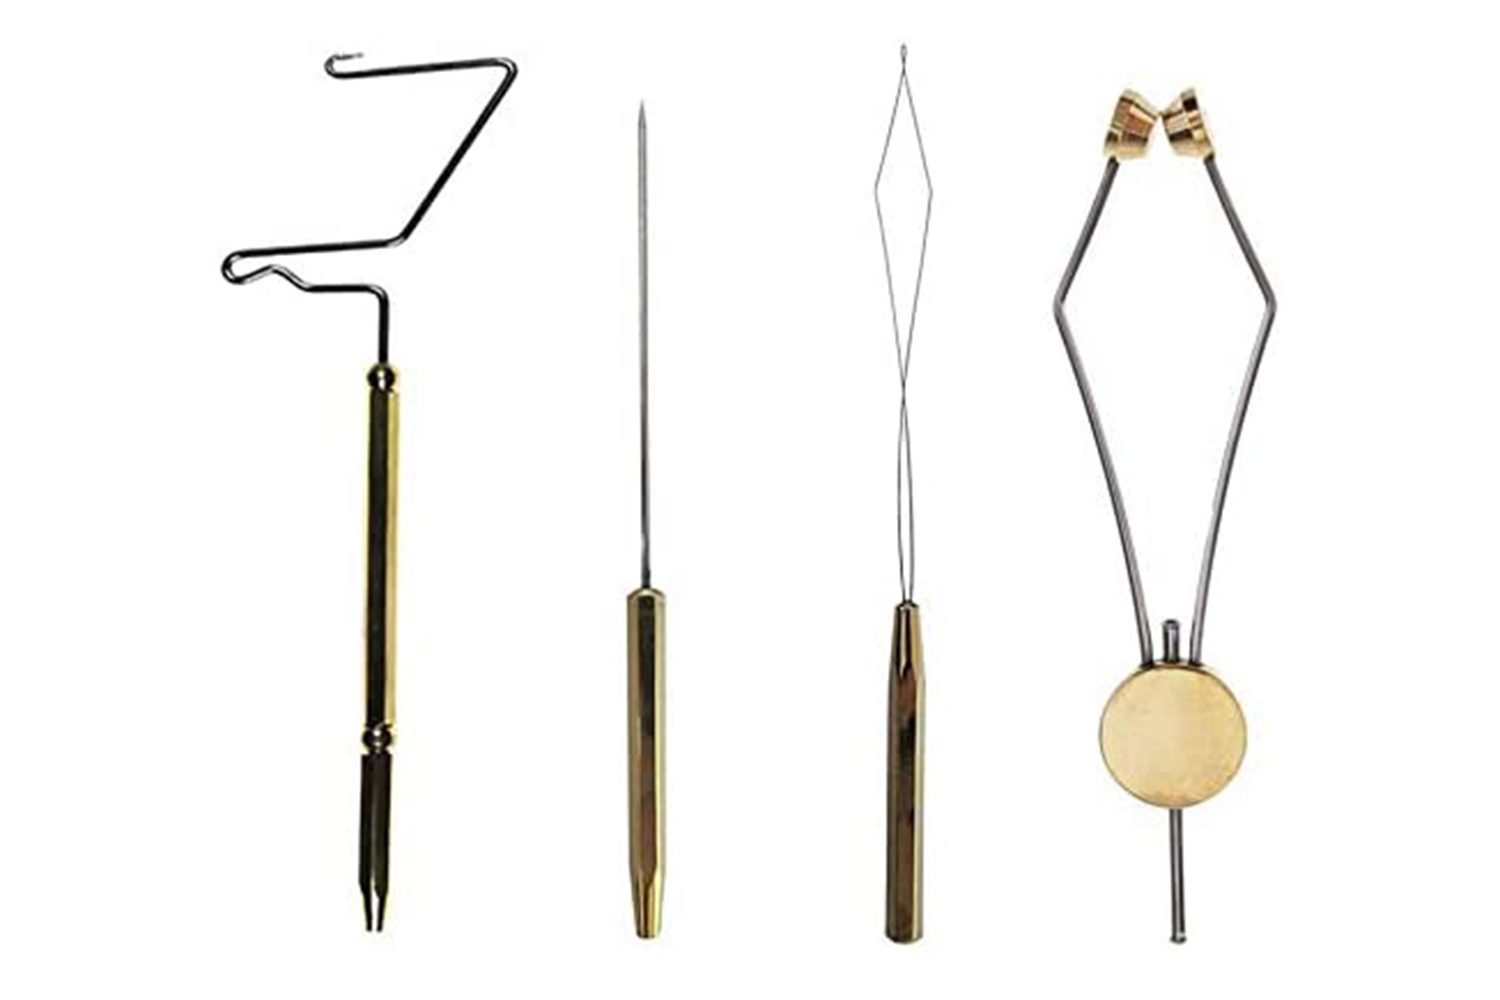 https://www.themanual.com/wp-content/uploads/sites/9/2021/10/four-piece-fly-tying-tool-combo-kit.jpg?fit=800%2C800&p=1